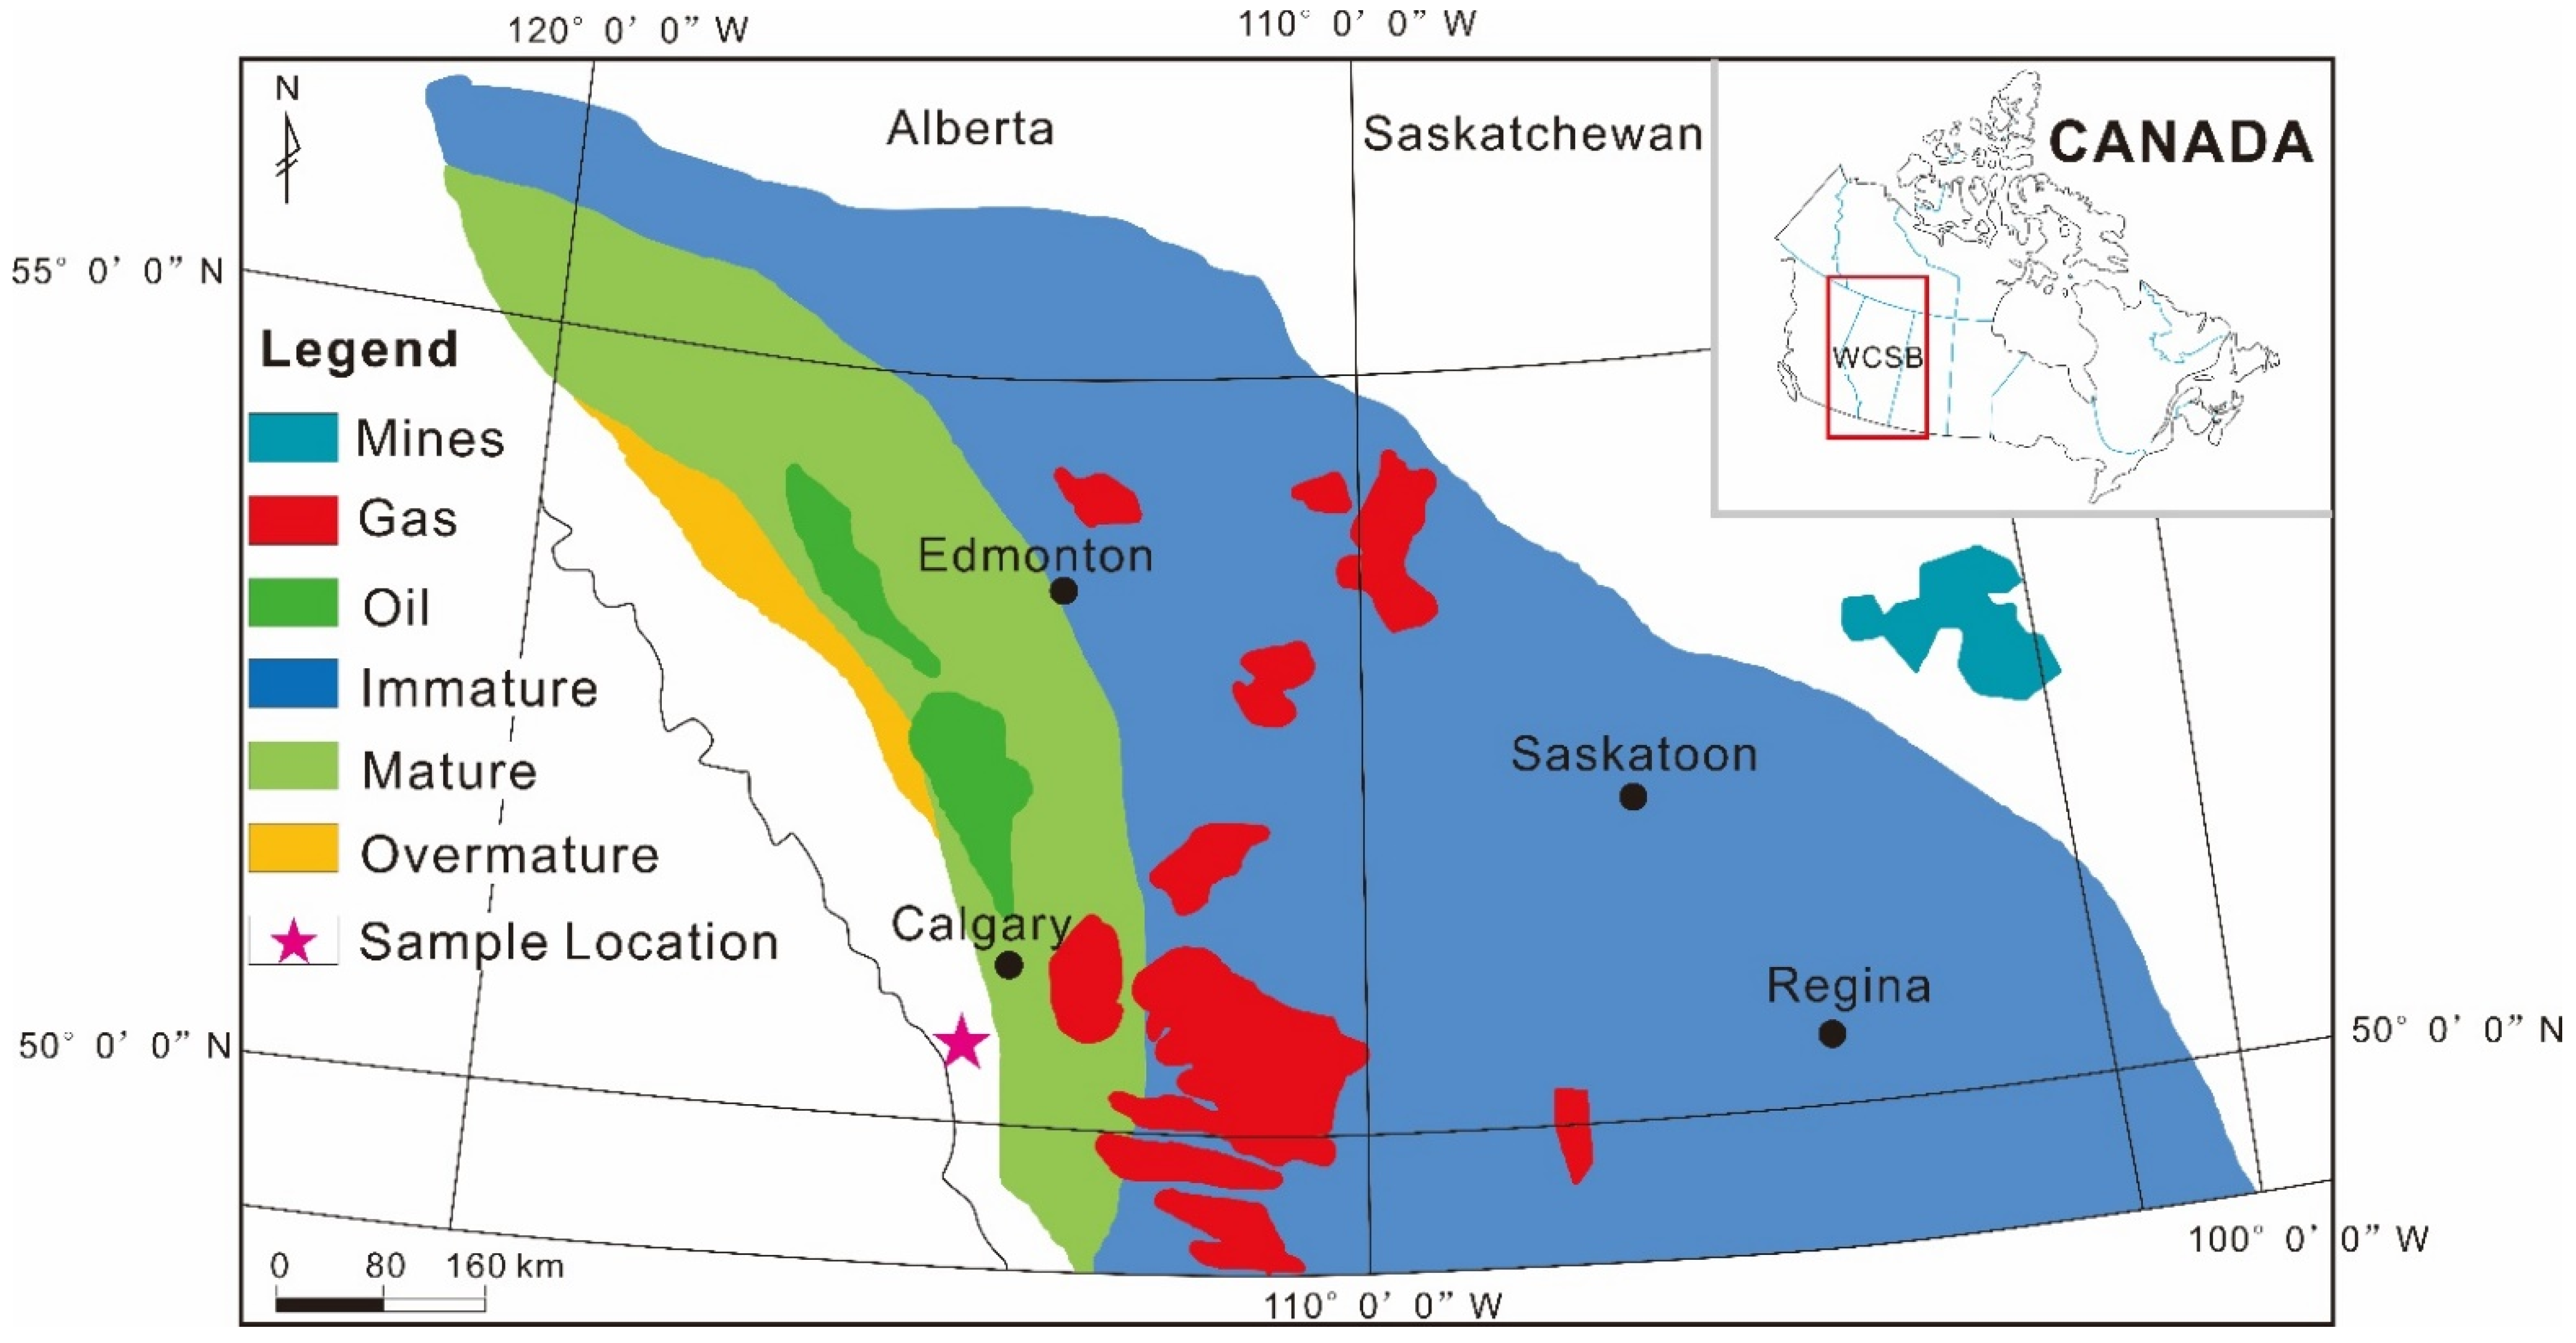 Minerals | Free Full-Text | Investigation on Oil Physical States of Hybrid  Shale Oil System: A Case Study on Cretaceous Second White Speckled Shale  Formation from Highwood River Outcrop, Southern Alberta